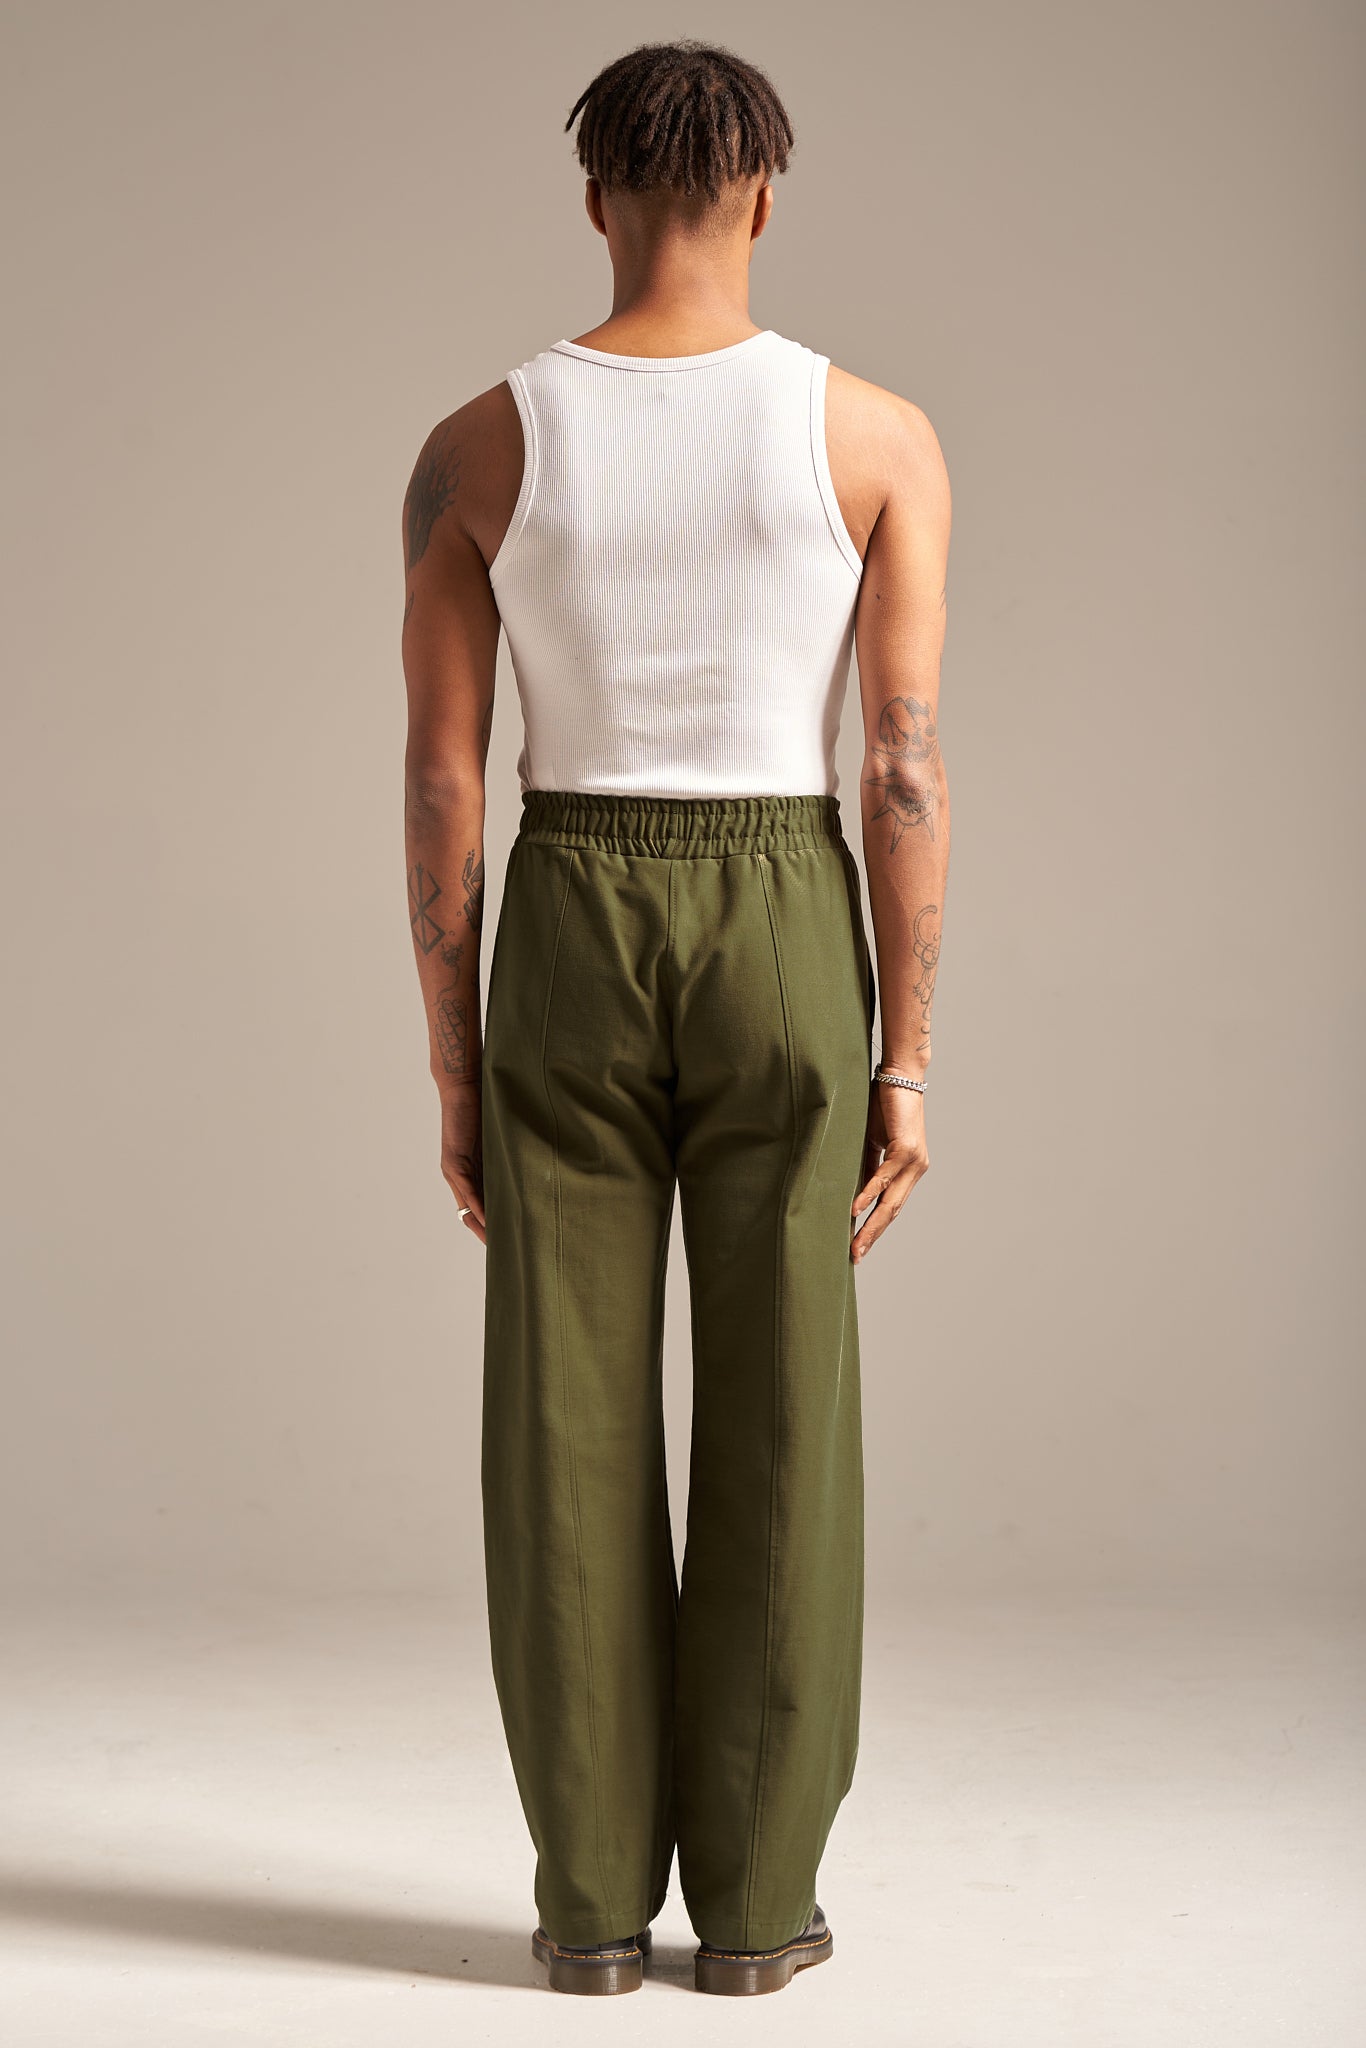 NWT A New Day Regular Fit Crop Pants 8 Olive